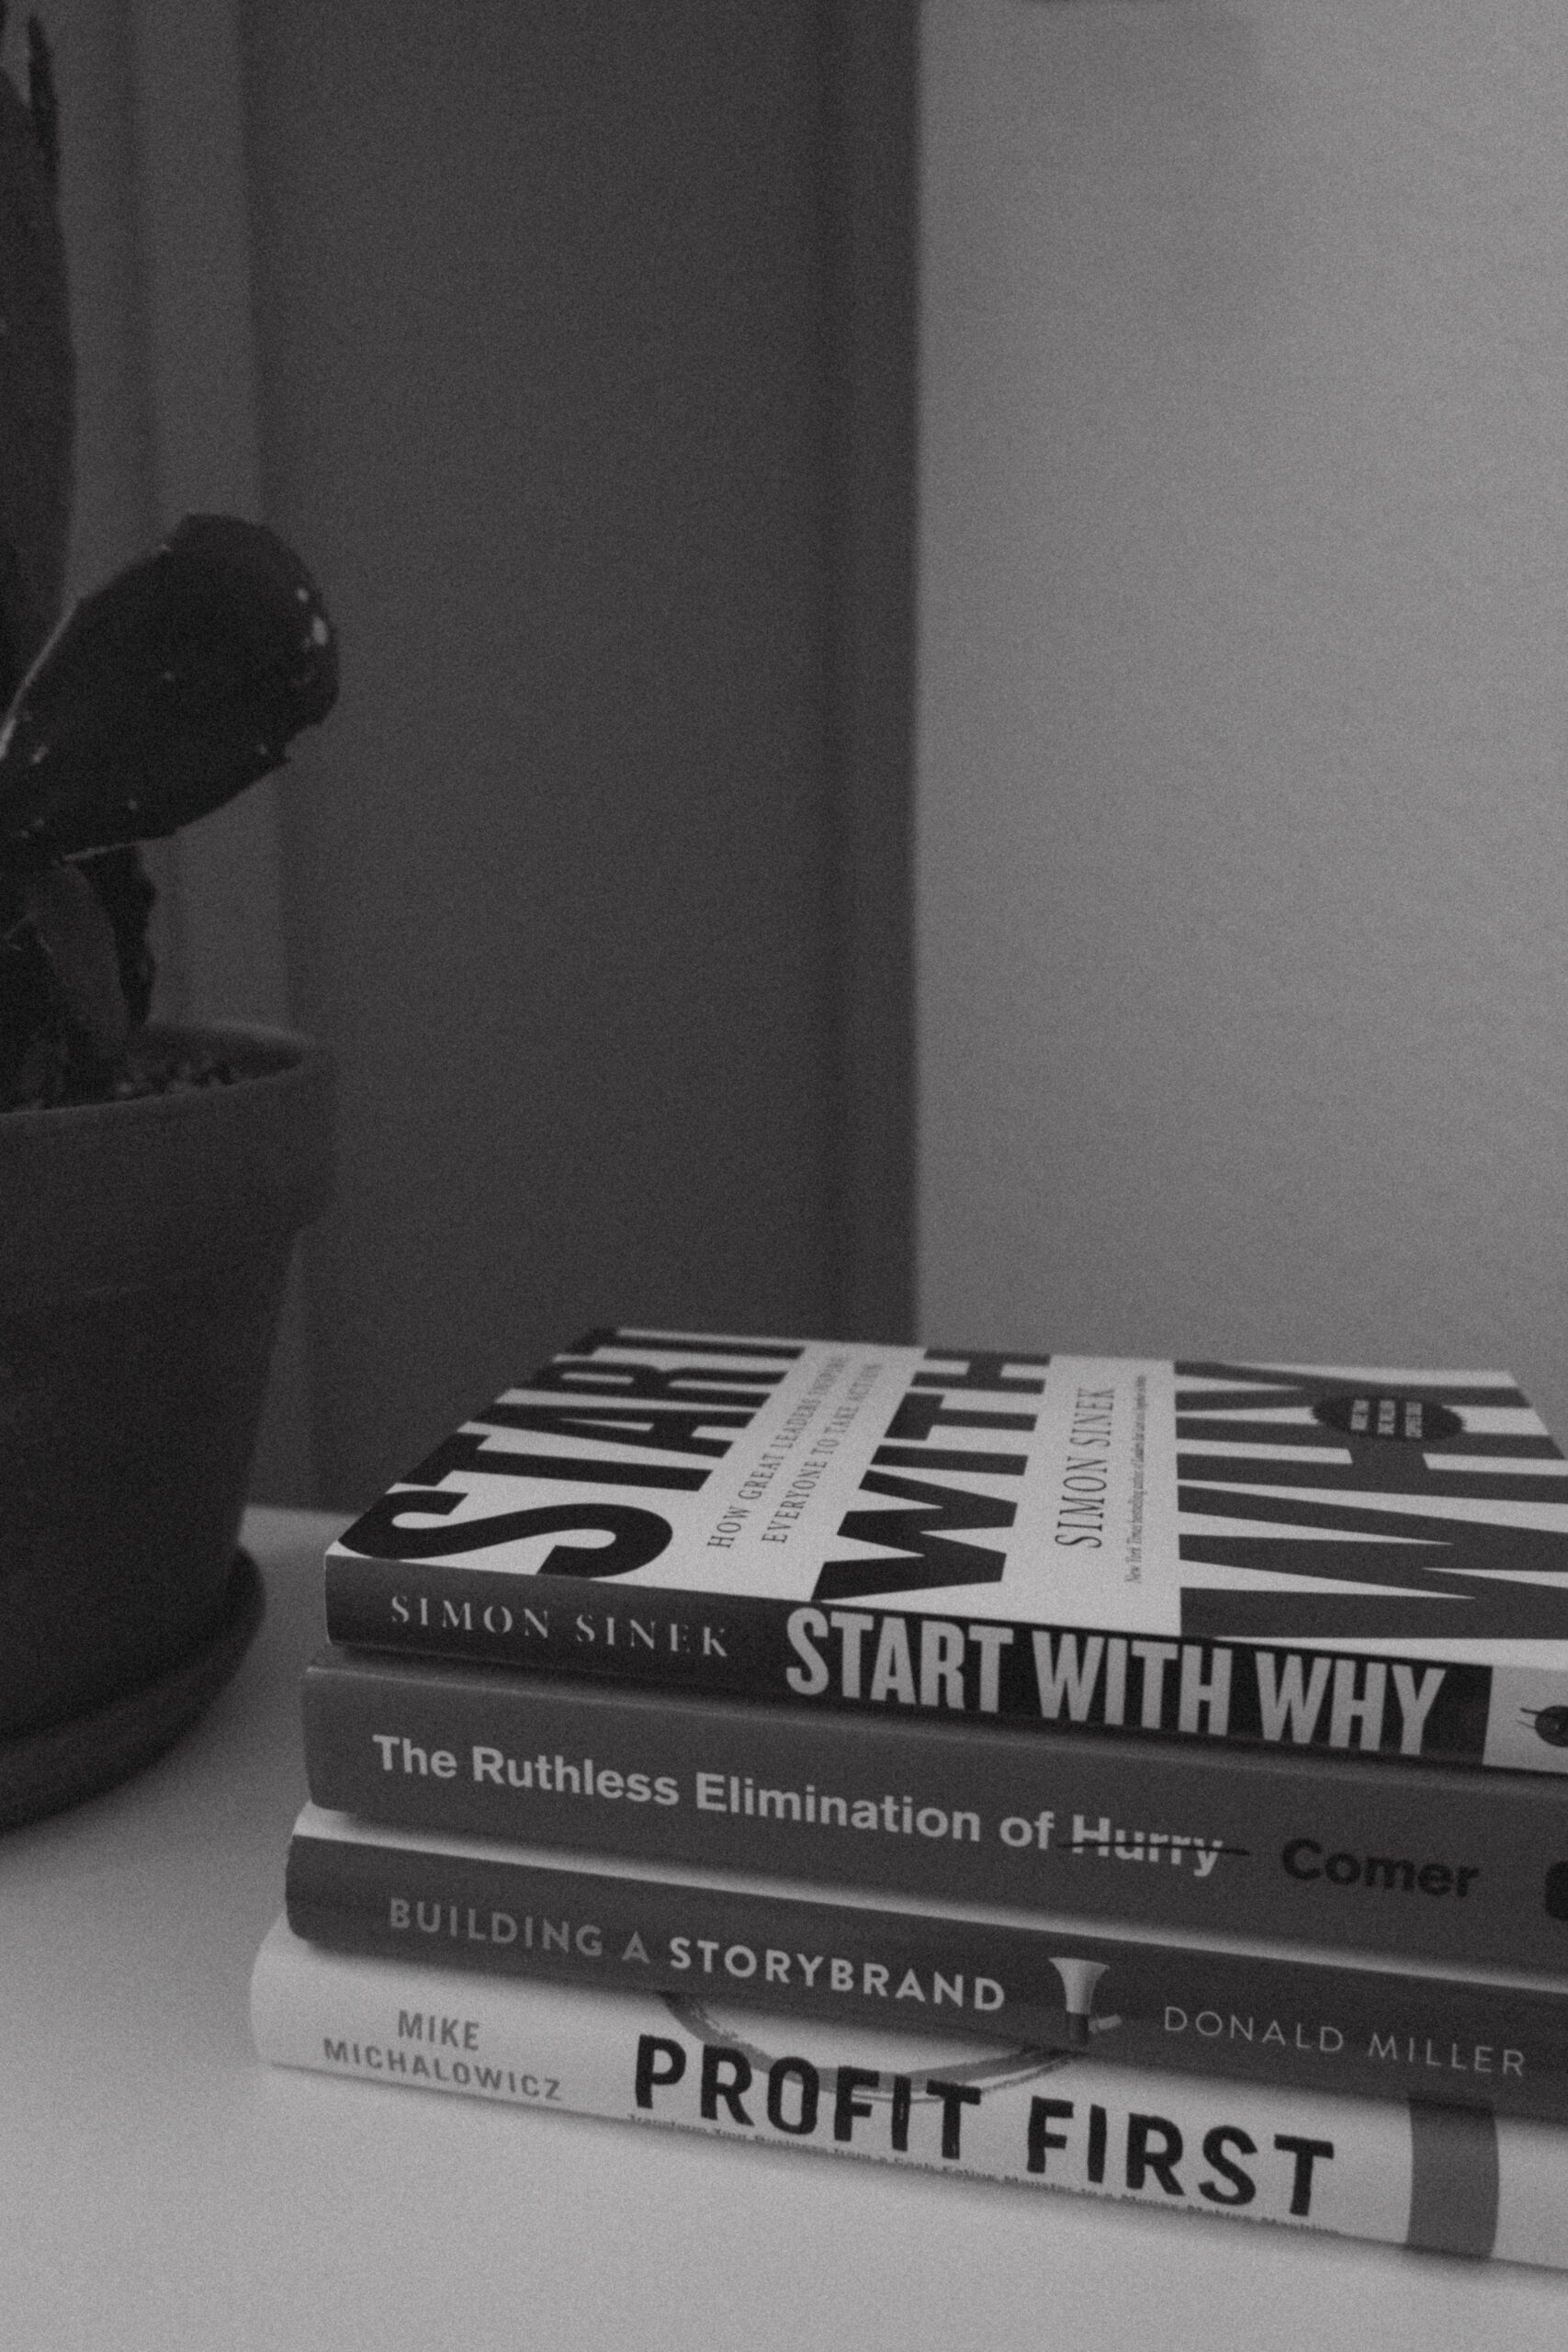 The Best Business Books for Photographers